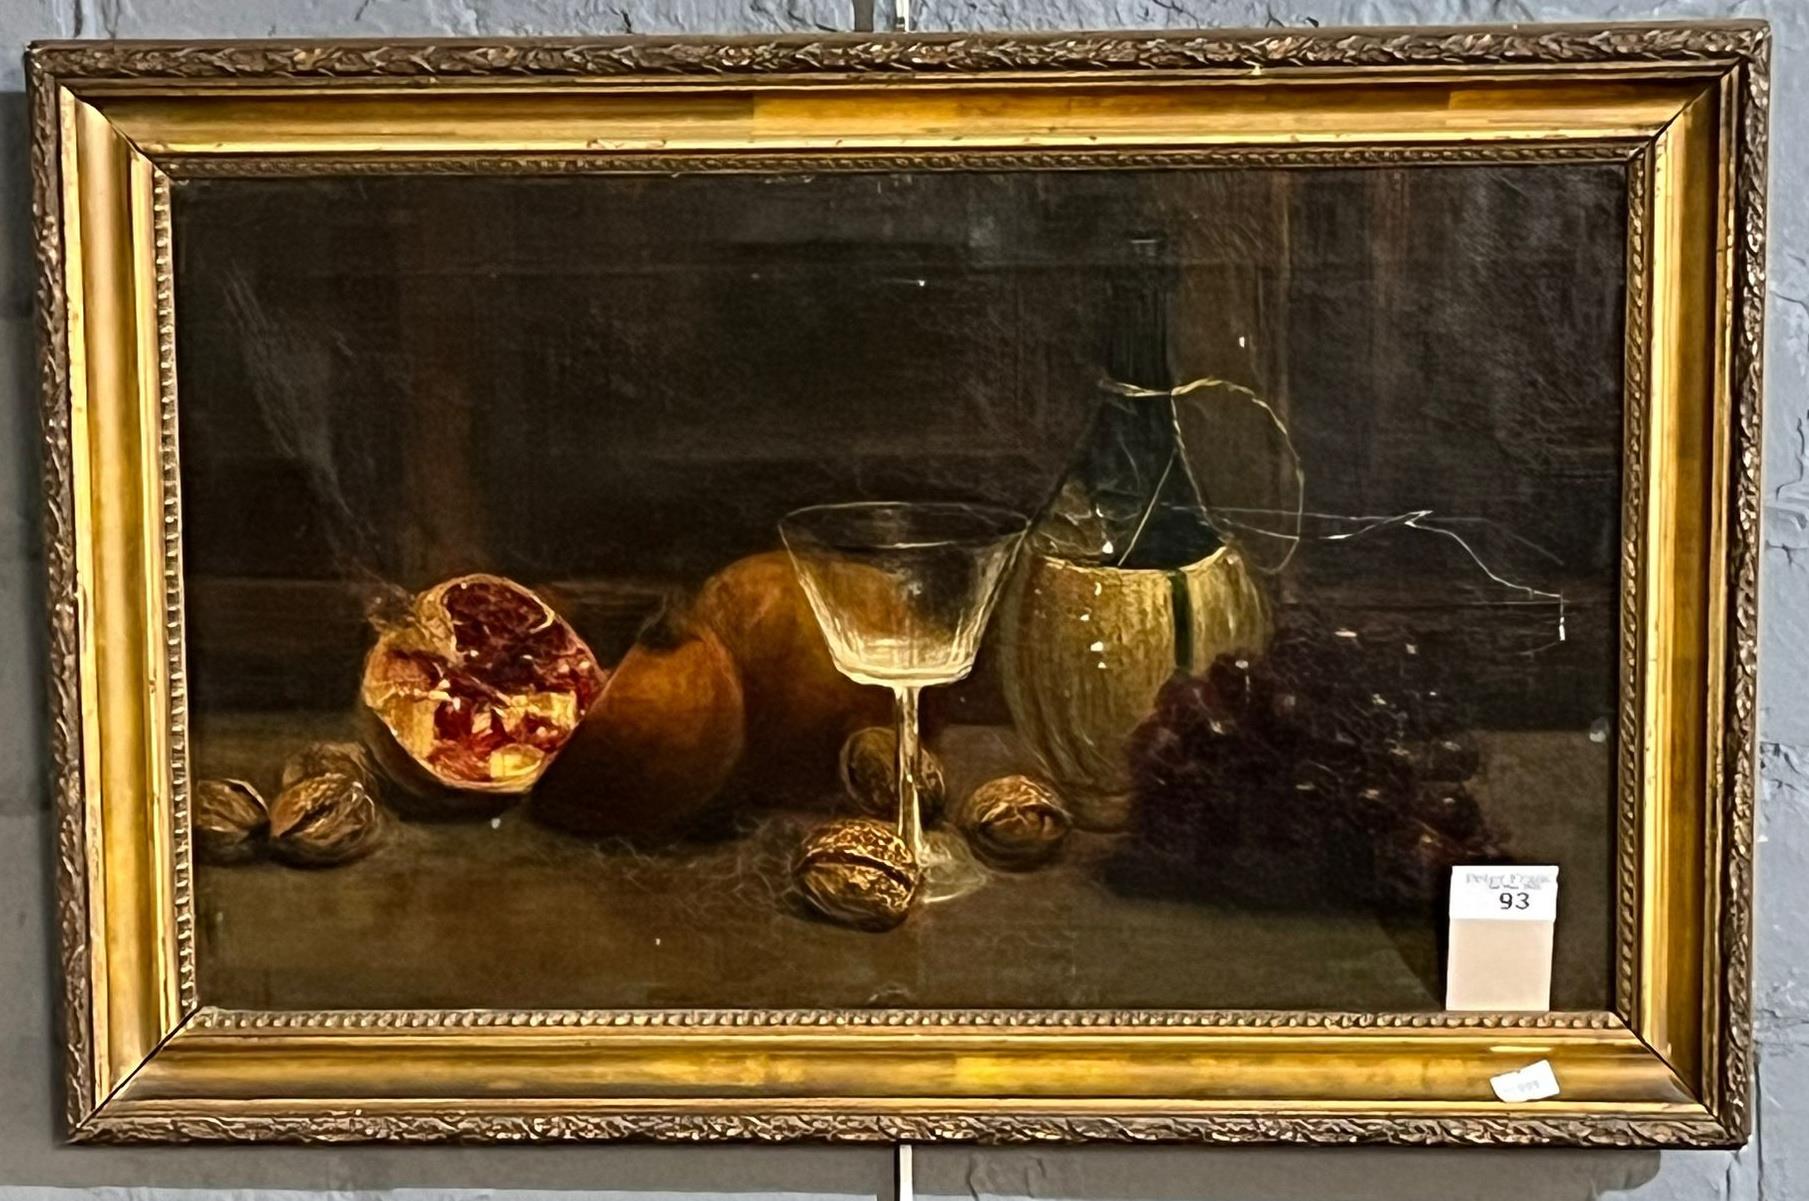 British school (19th century), still life study of fruit with wine glass and bottle. Oils on canvas.